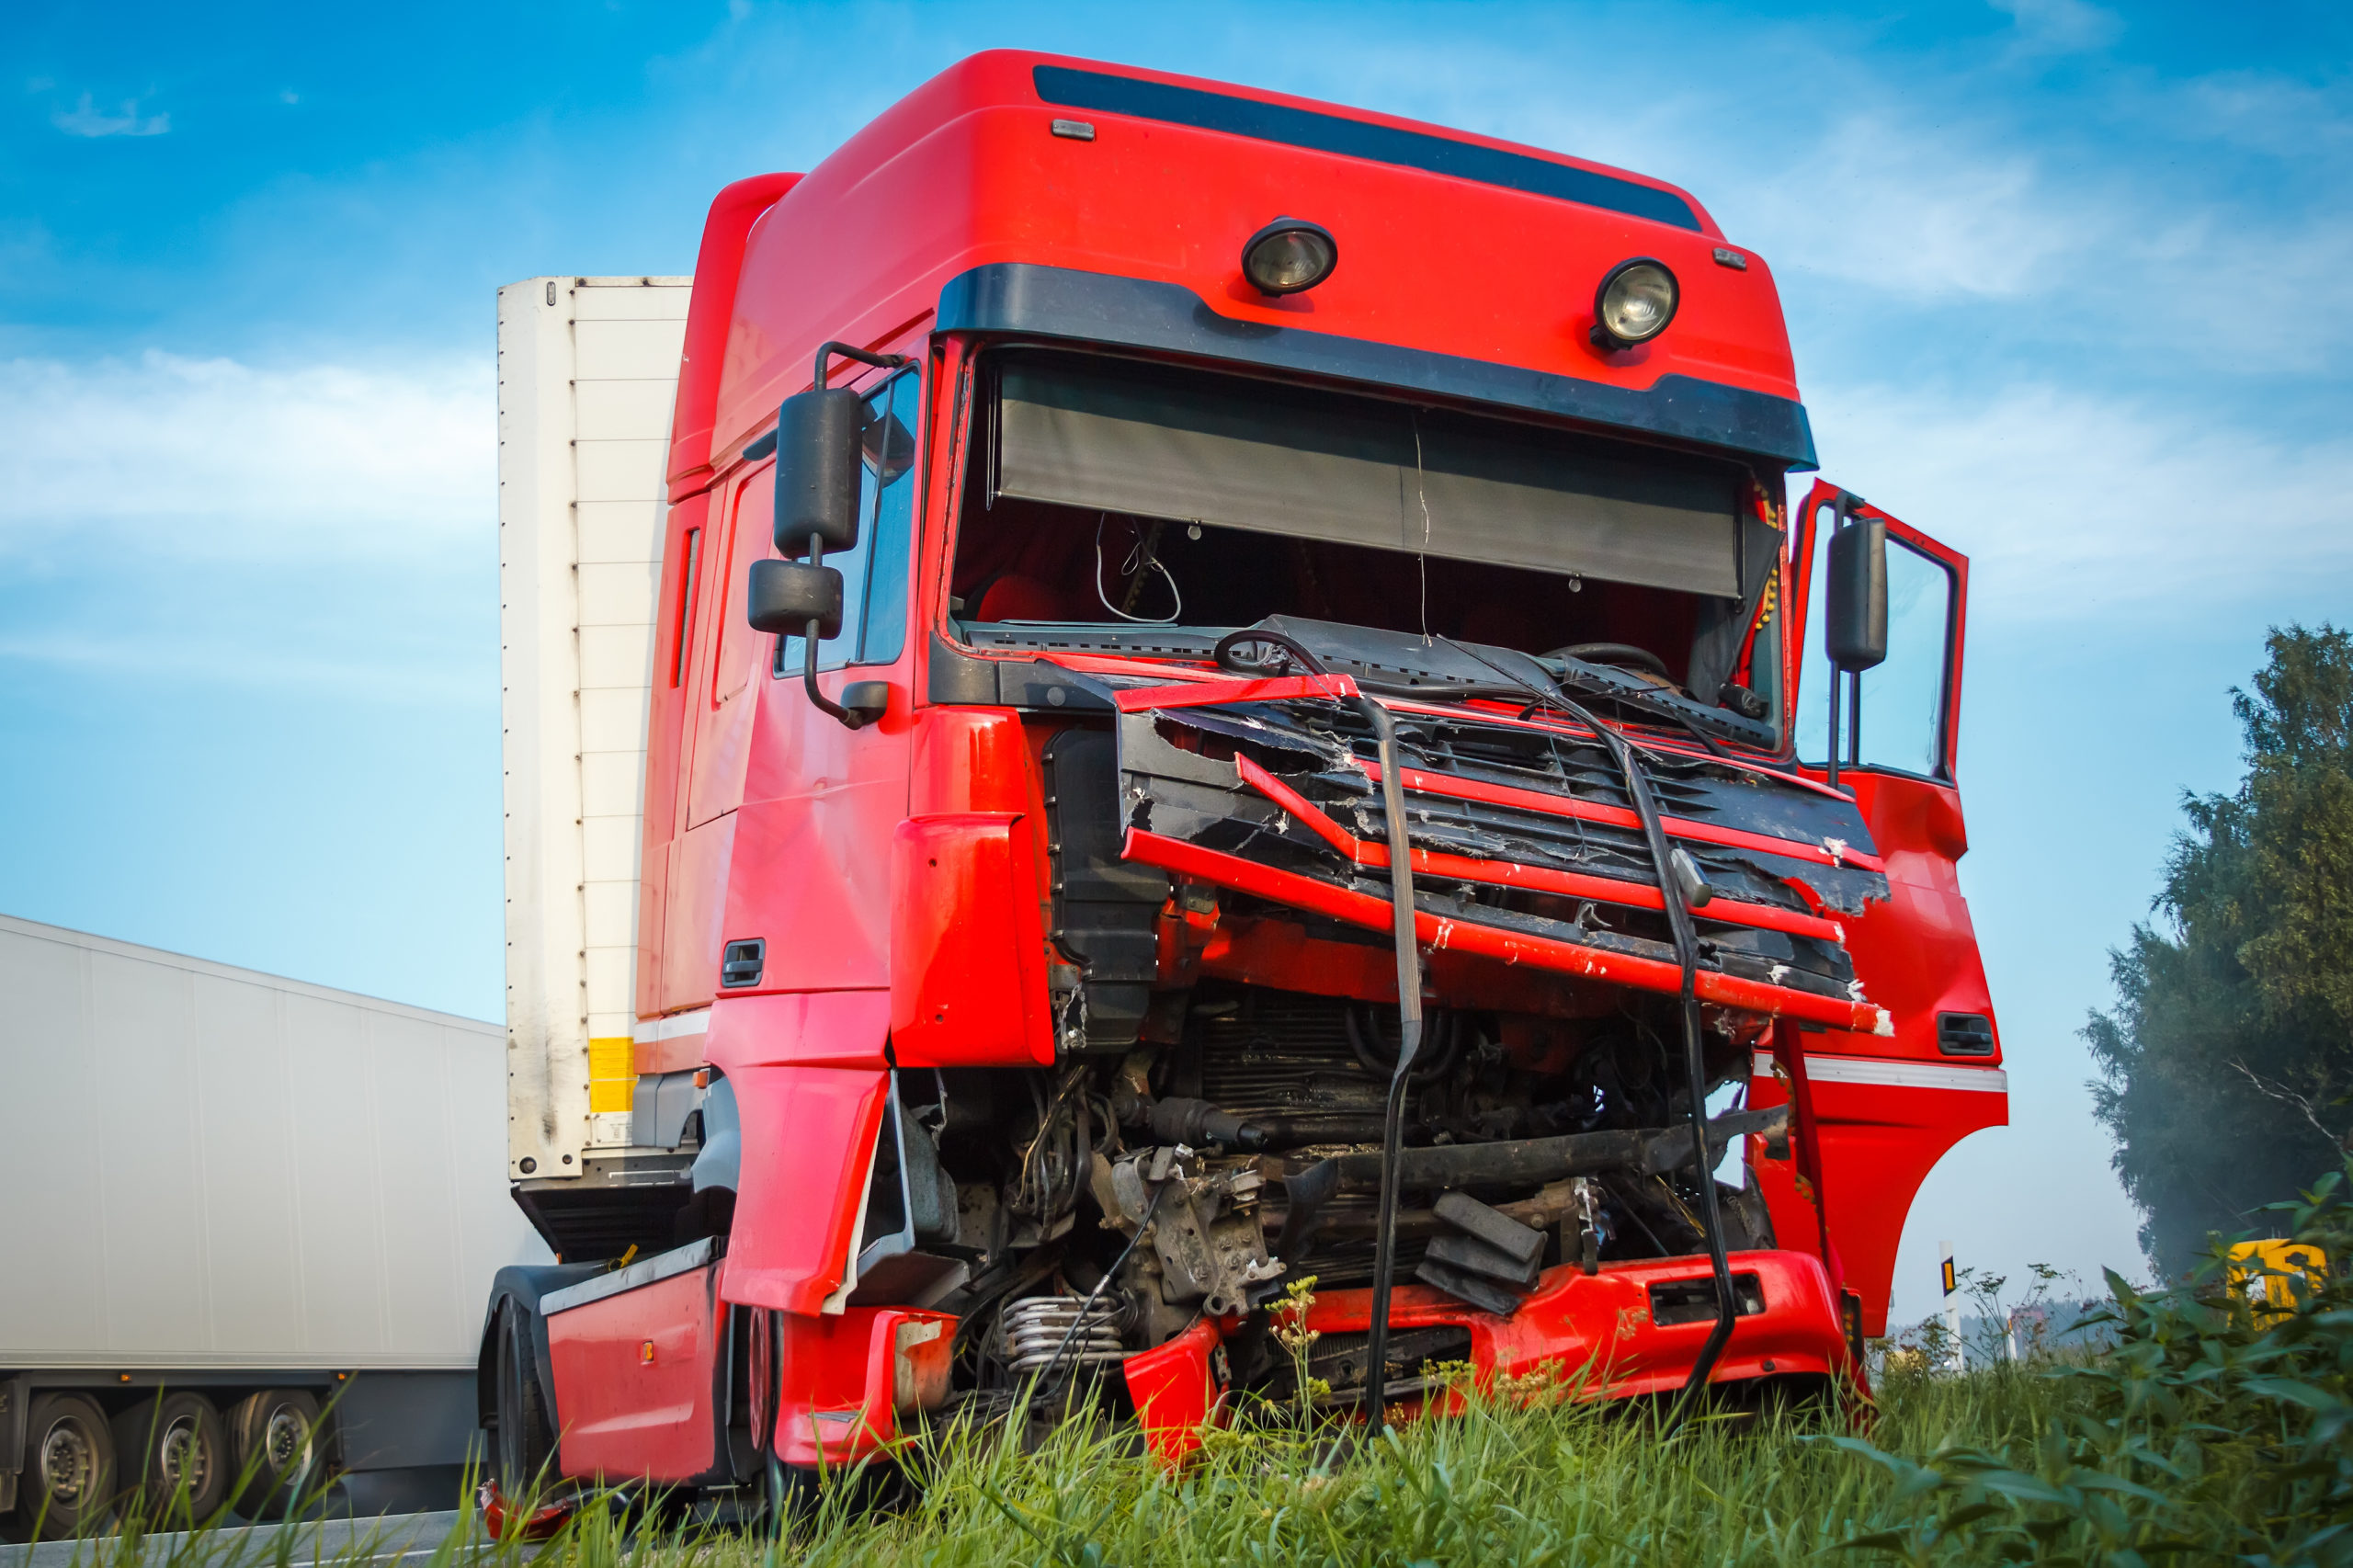 Motor vehicle accidents involving commercial vehicles lawsuit claim attorney Minnesota injury